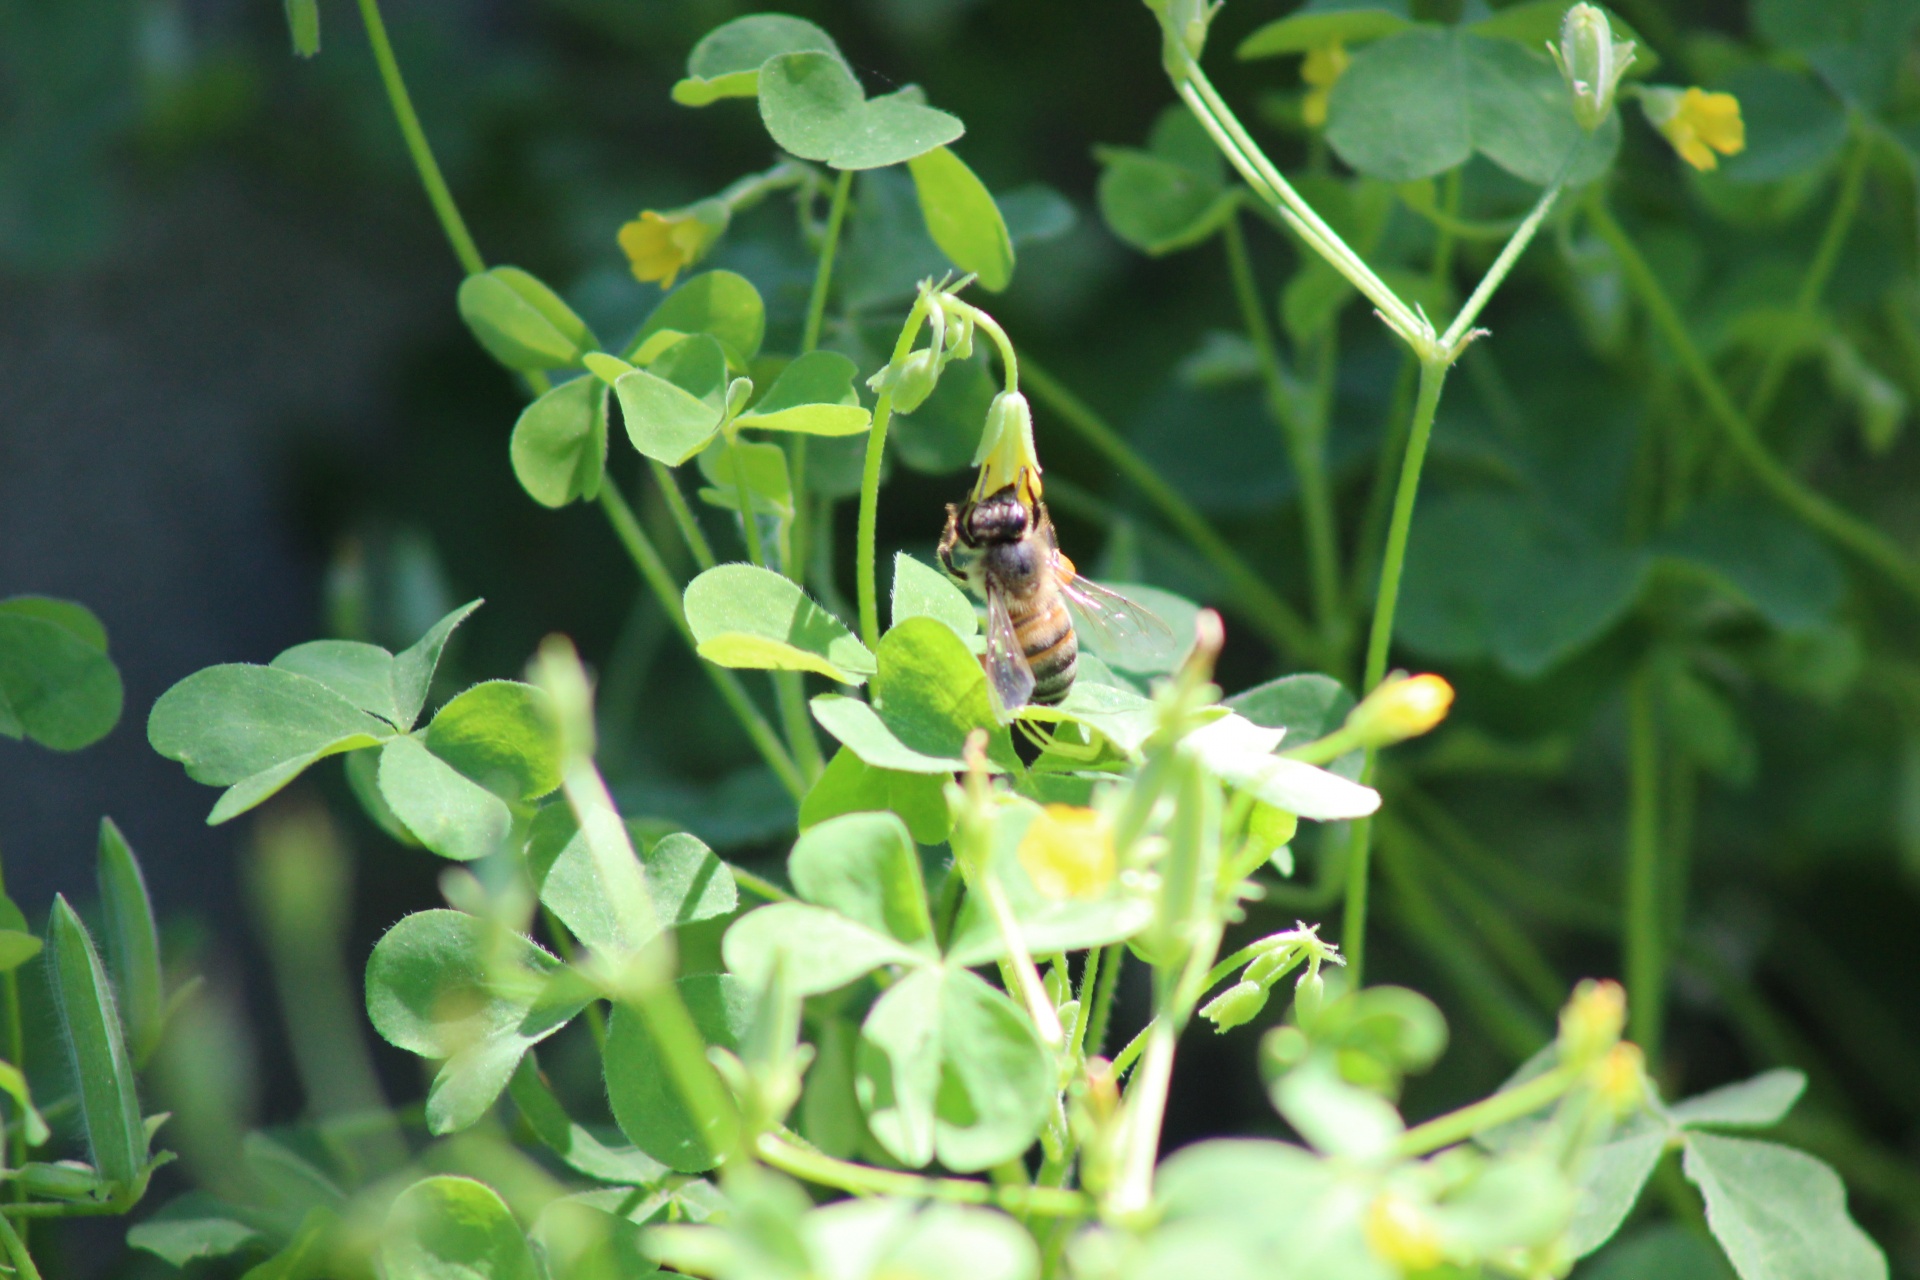 I have a clover patch in my backyard. The bees make their rounds in the garden, and as they do, they drop by to drink out of the little yellow clover blossoms. I caught it while it was busy pollinating.